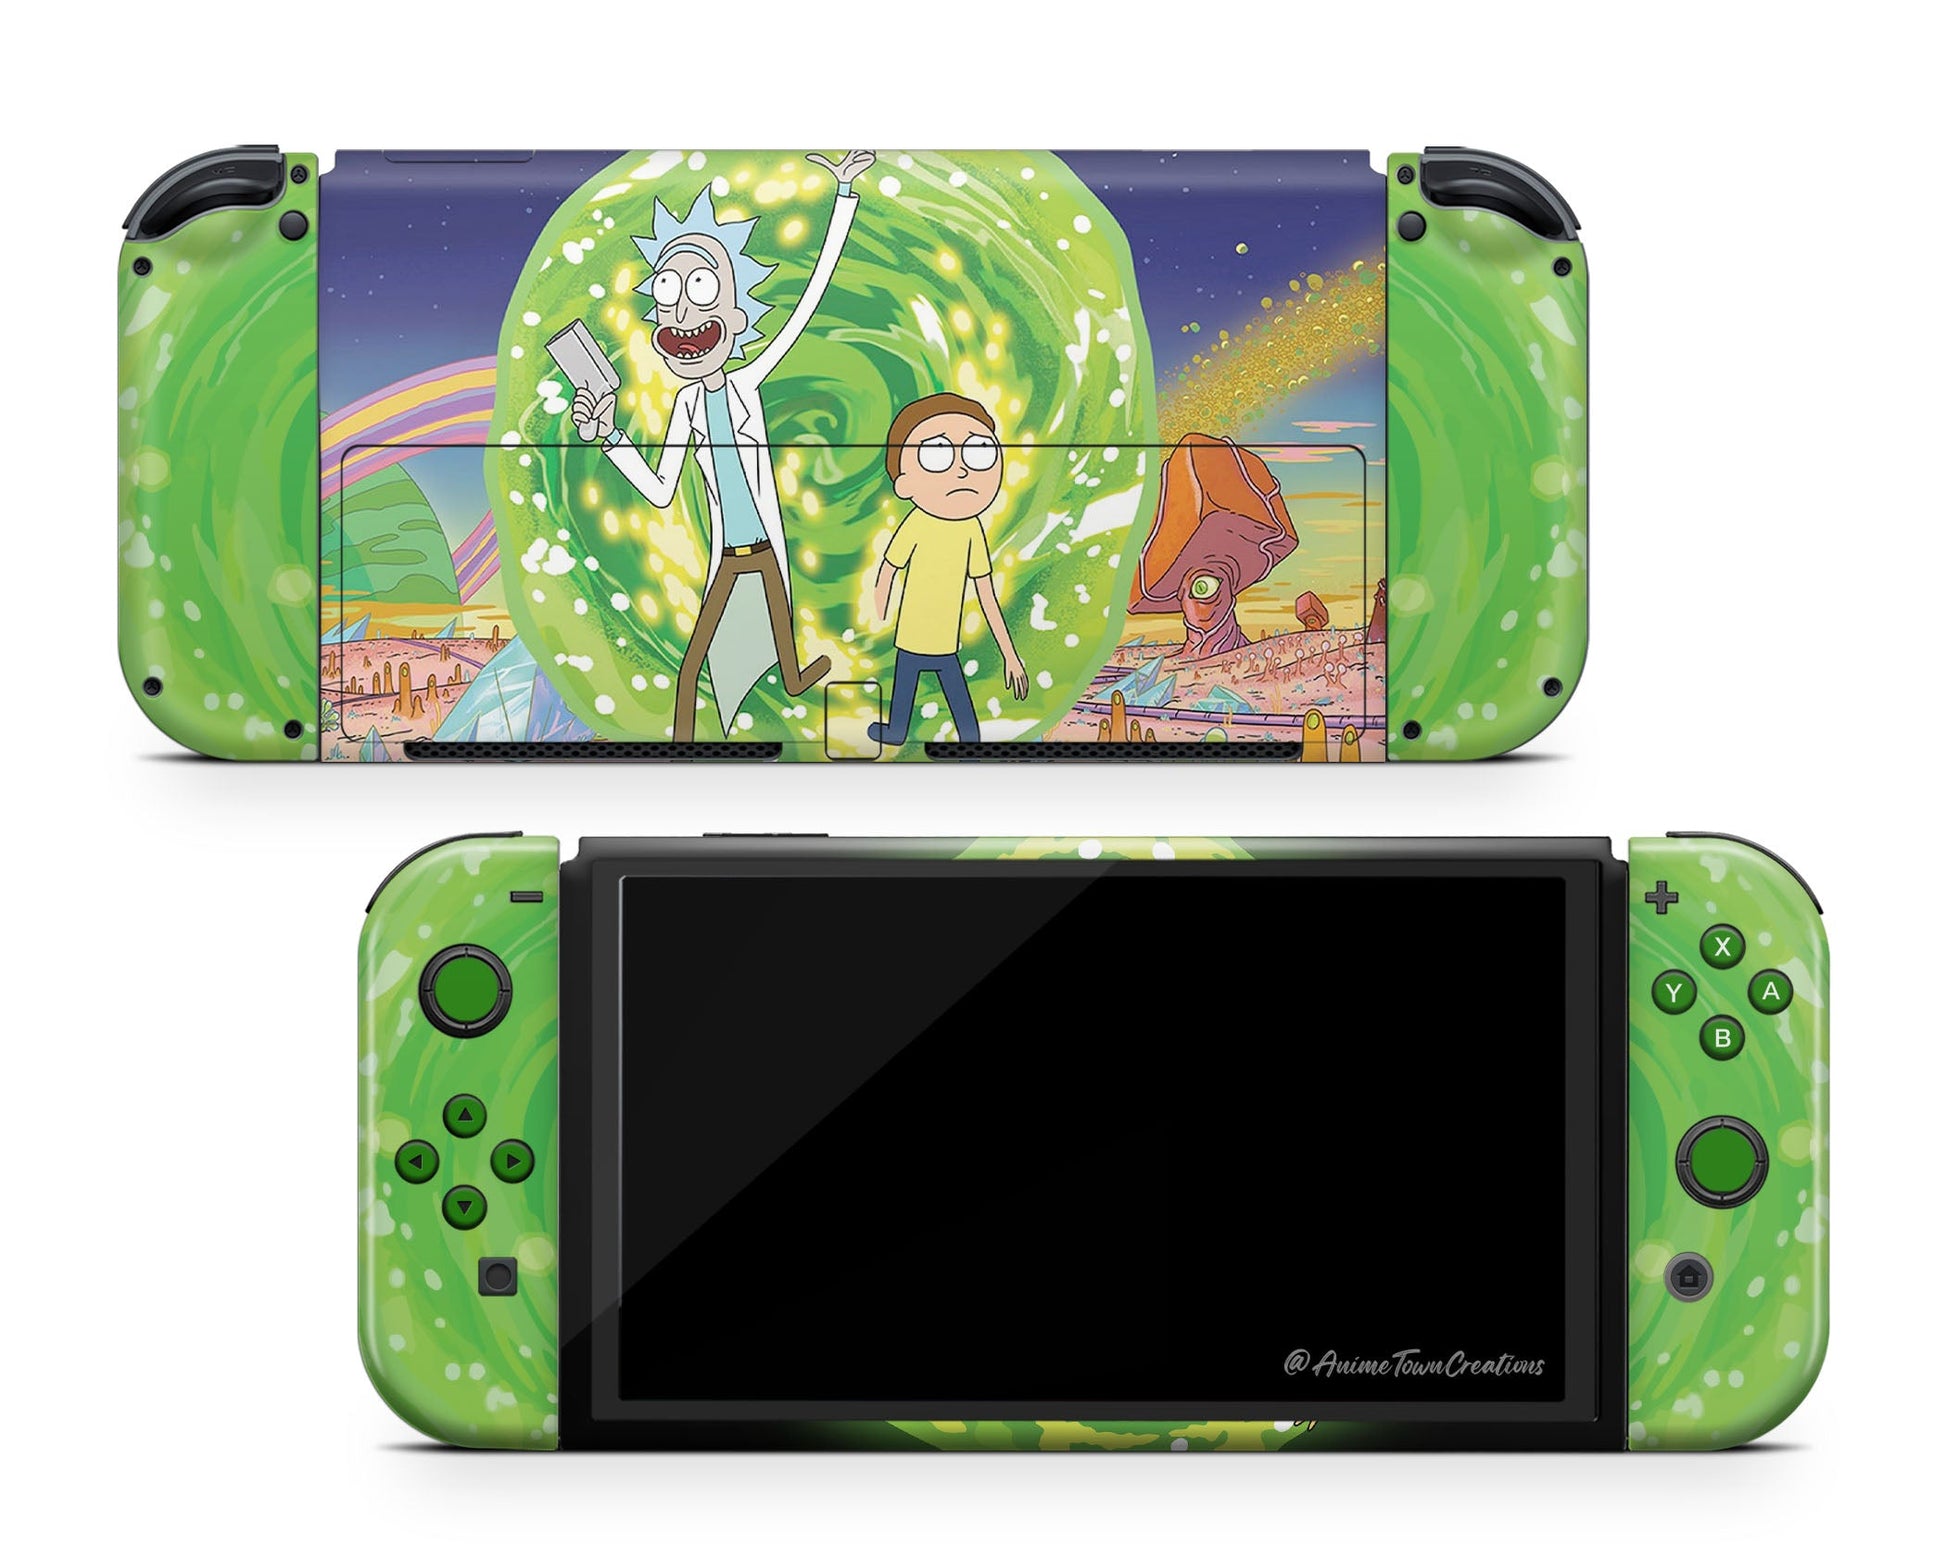 Anime Town Creations Nintendo Switch OLED Rick and Morty Portal Time Vinyl +Tempered Glass Skins - Anime Rick and Morty Switch OLED Skin